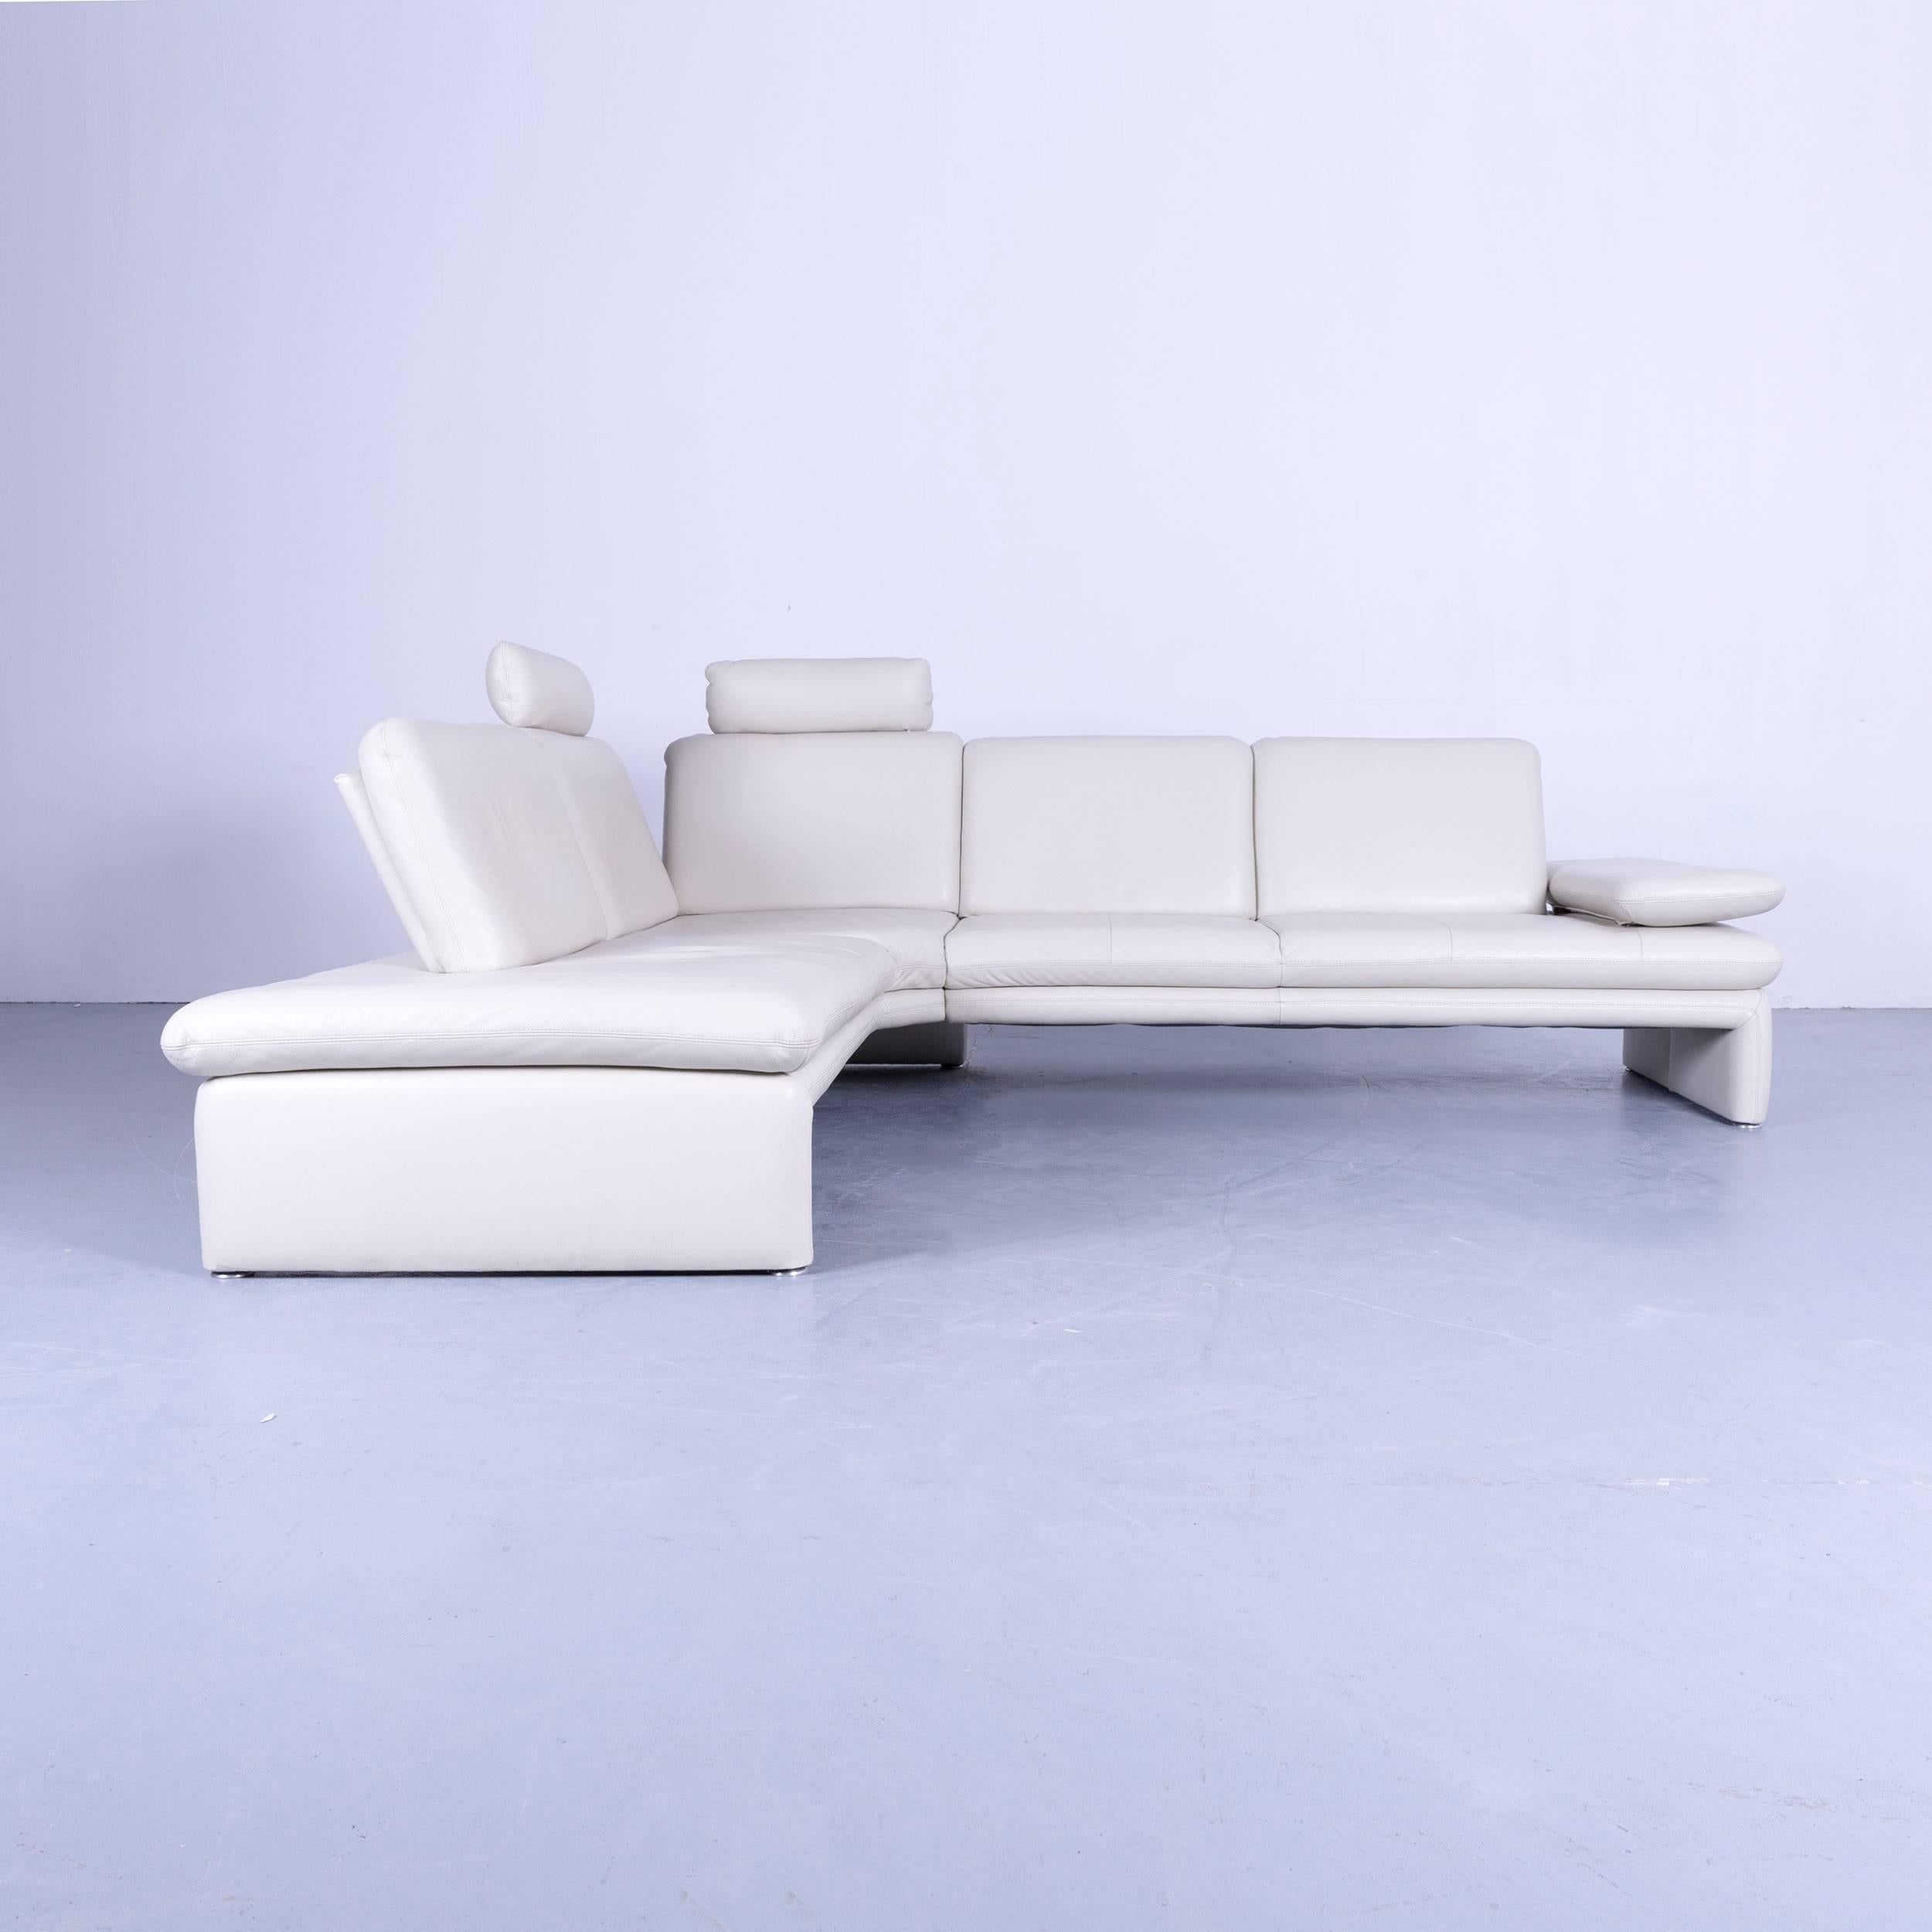 A corner sofa made in Germany by Willi Schillig in a nice white color with useful functions.